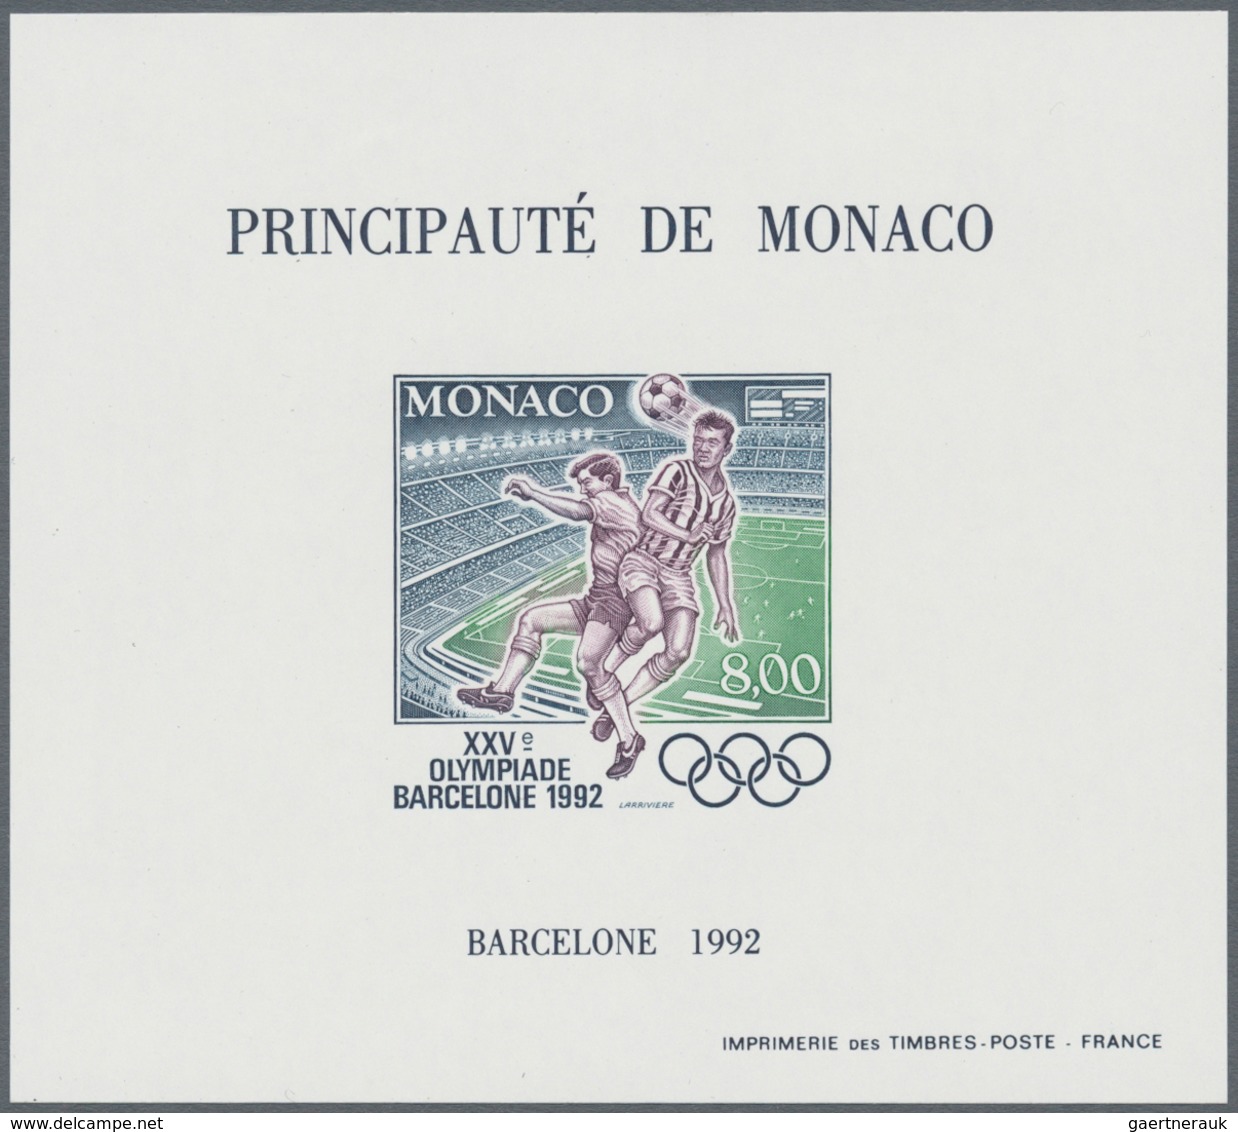 Monaco: 1885/1955 (ca.), duplicates on stockcards with many better stamps incl. a very great part of